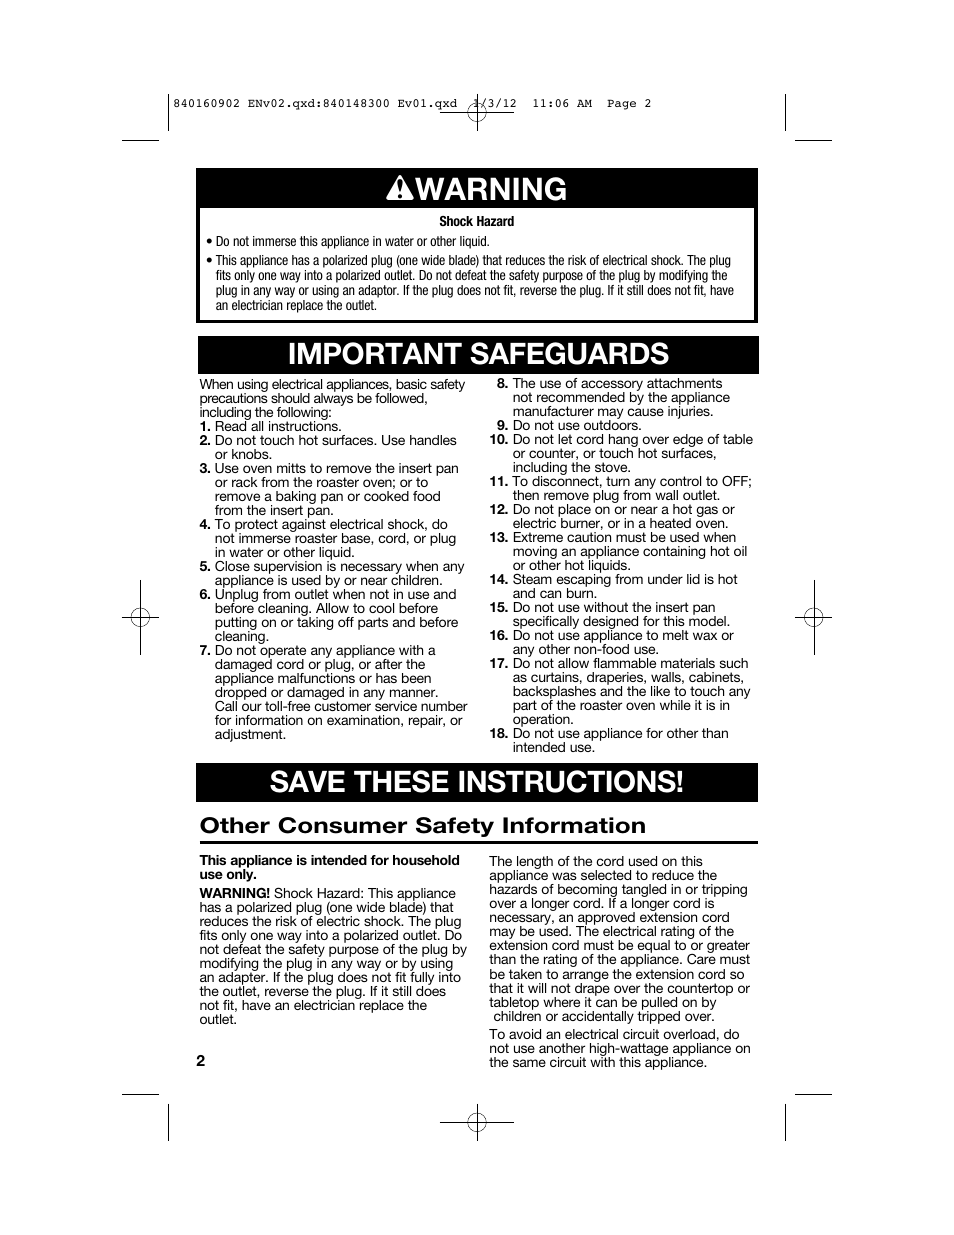 Wwarning, Important safeguards save these instructions, Other consumer